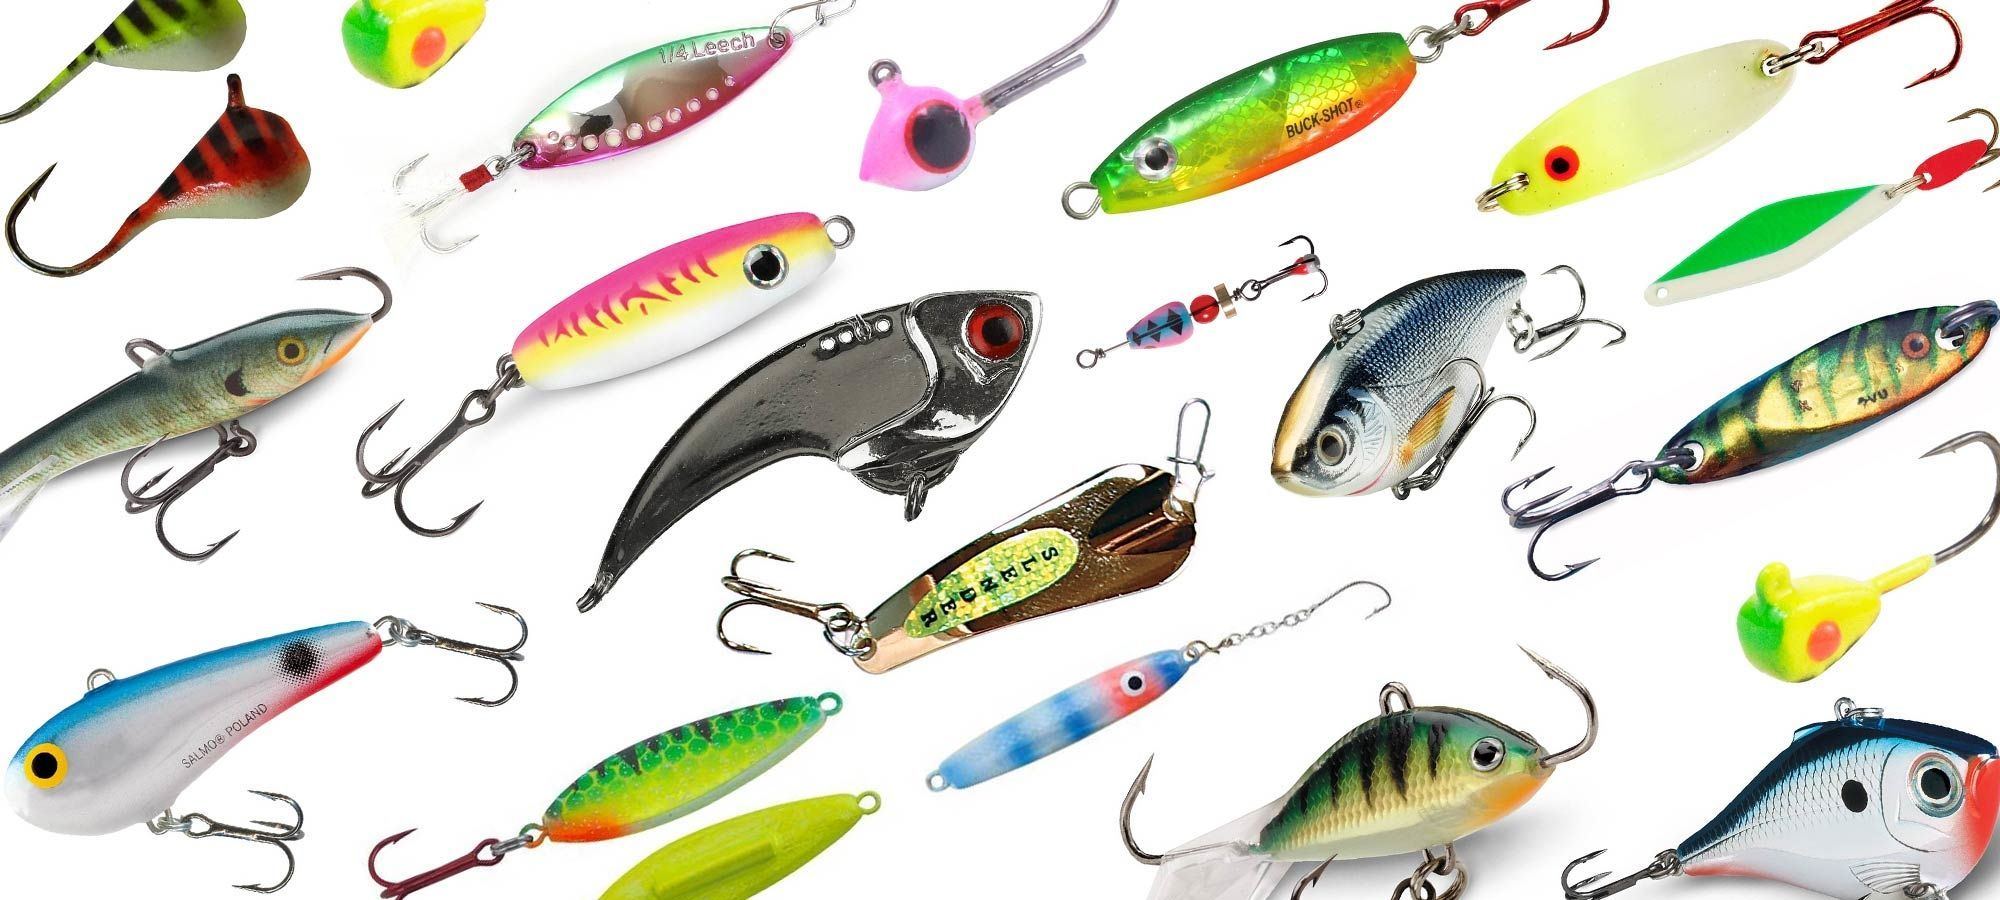 Jetson reccomend Ice fishing chubby lure